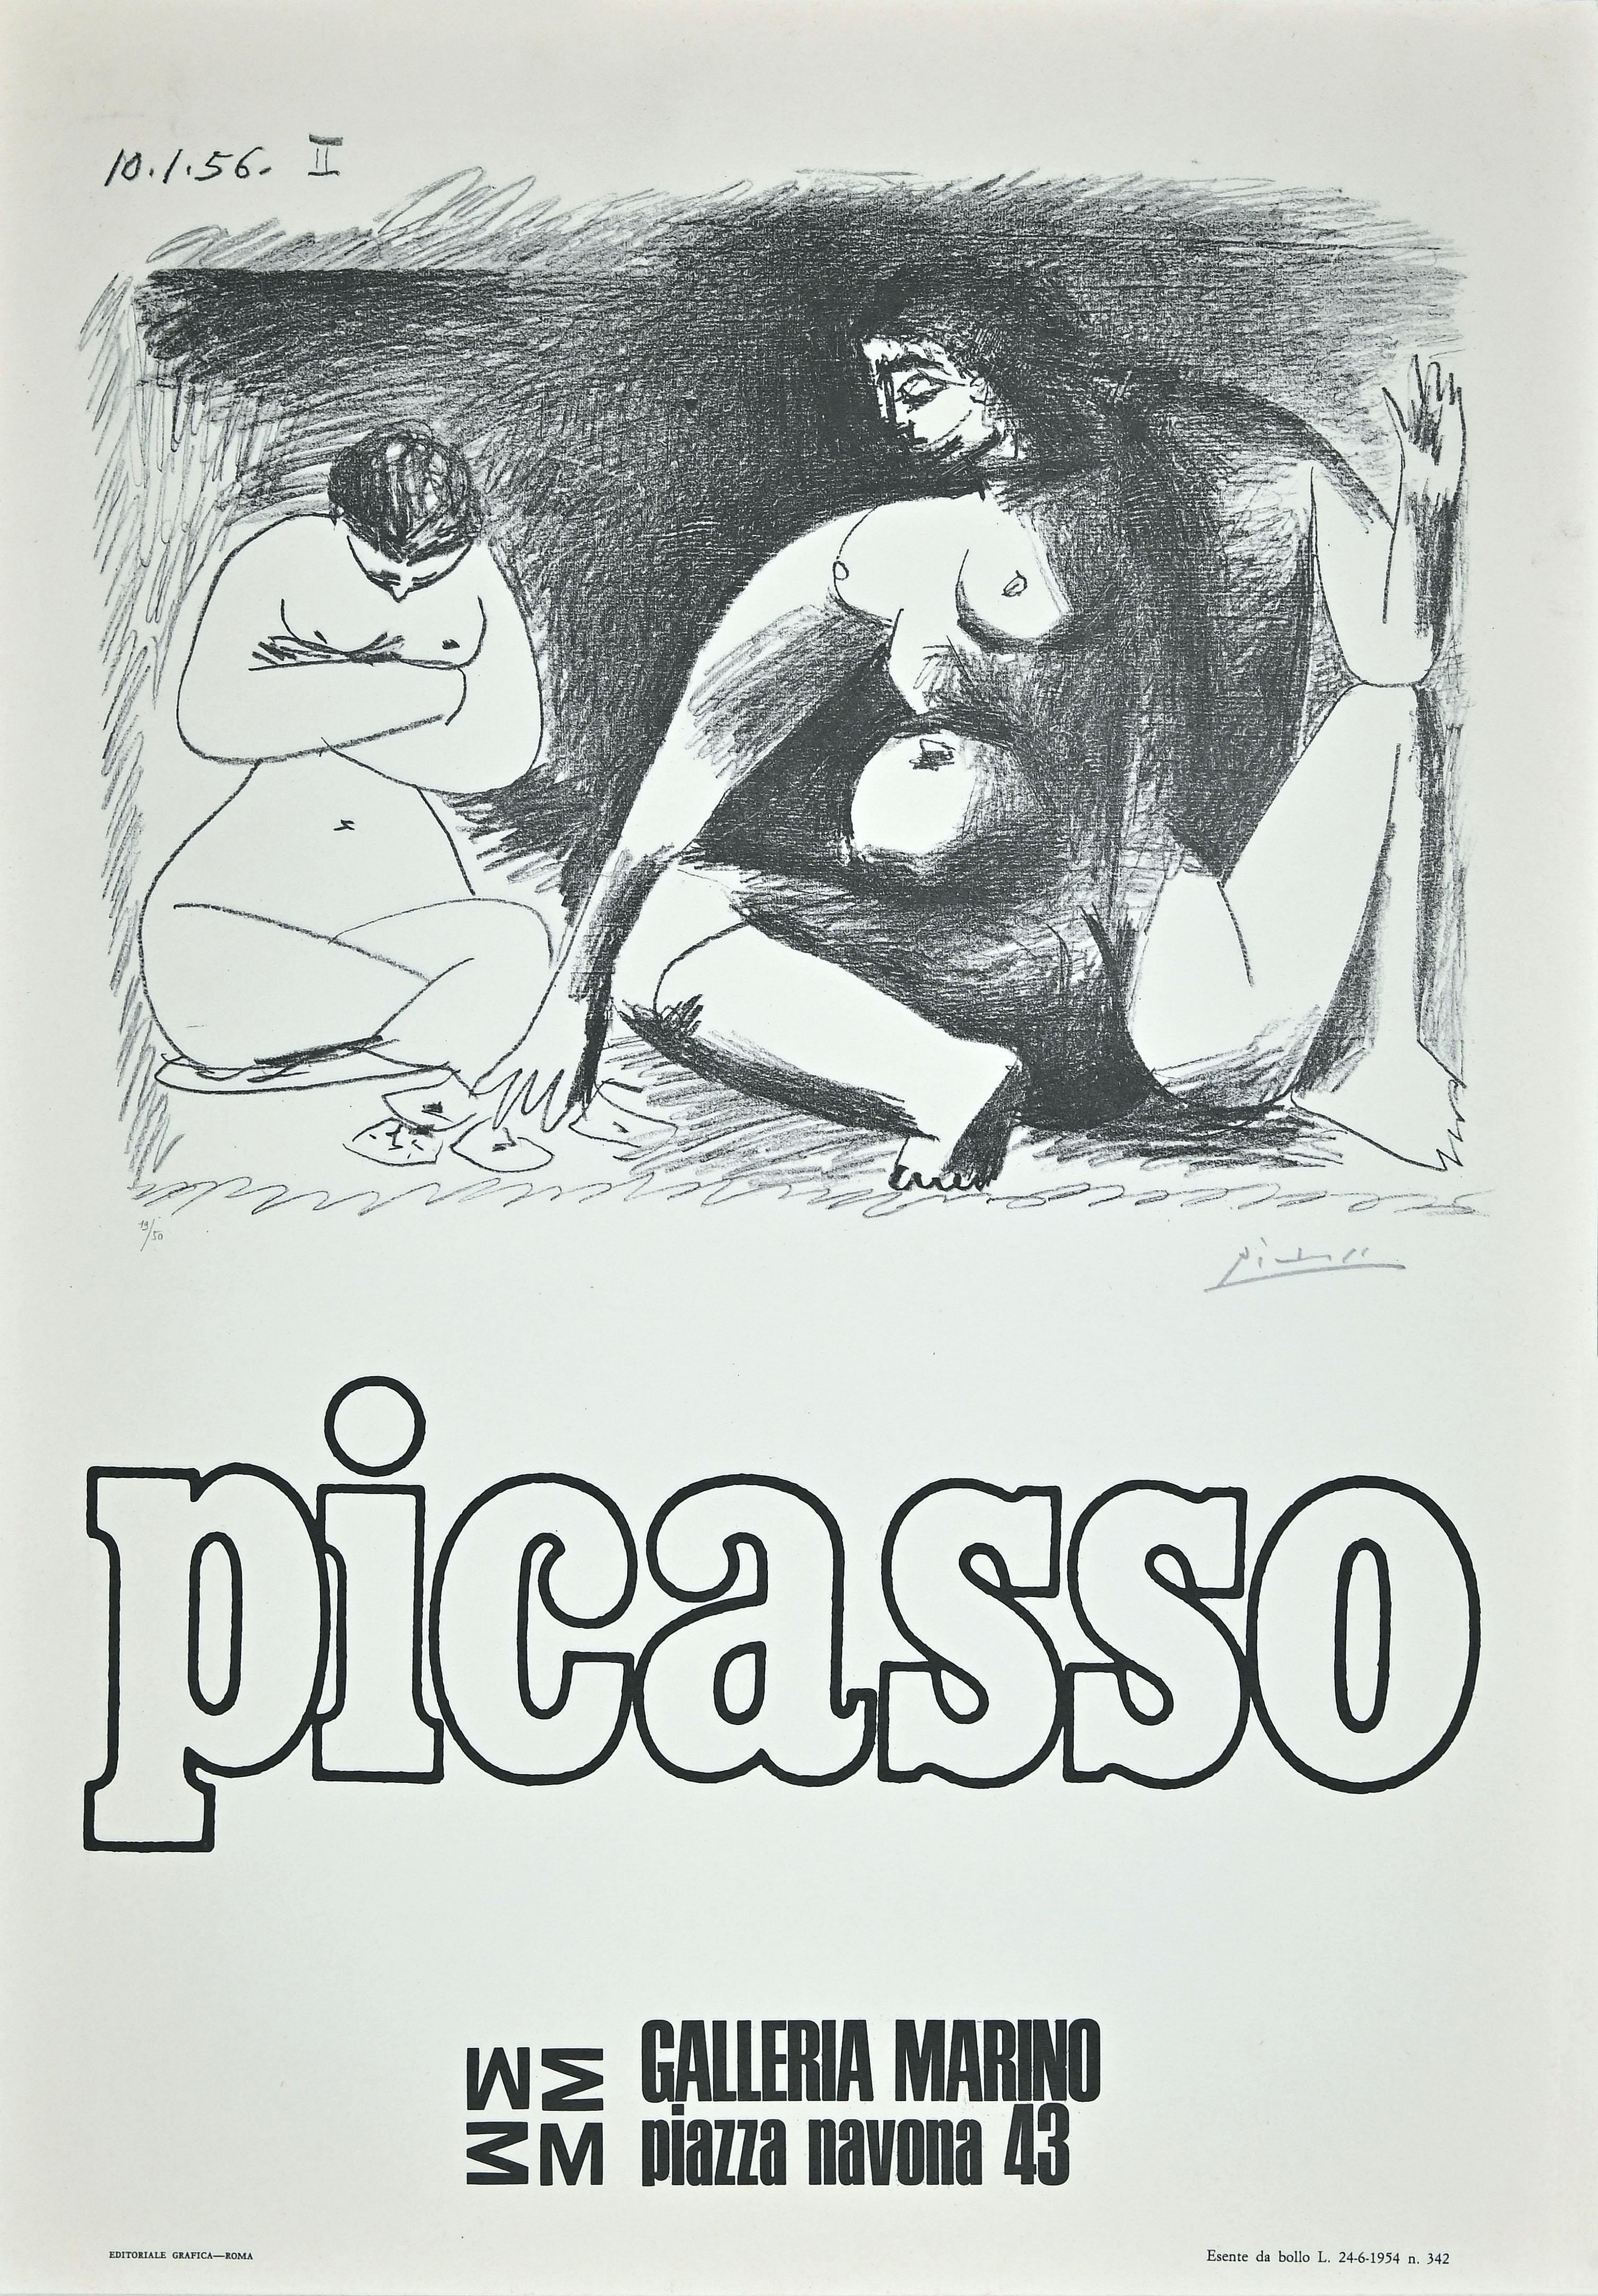 Pablo Picasso Figurative Print - Picasso Exhibition Poster - Original Offset by Picasso (after) - 1974